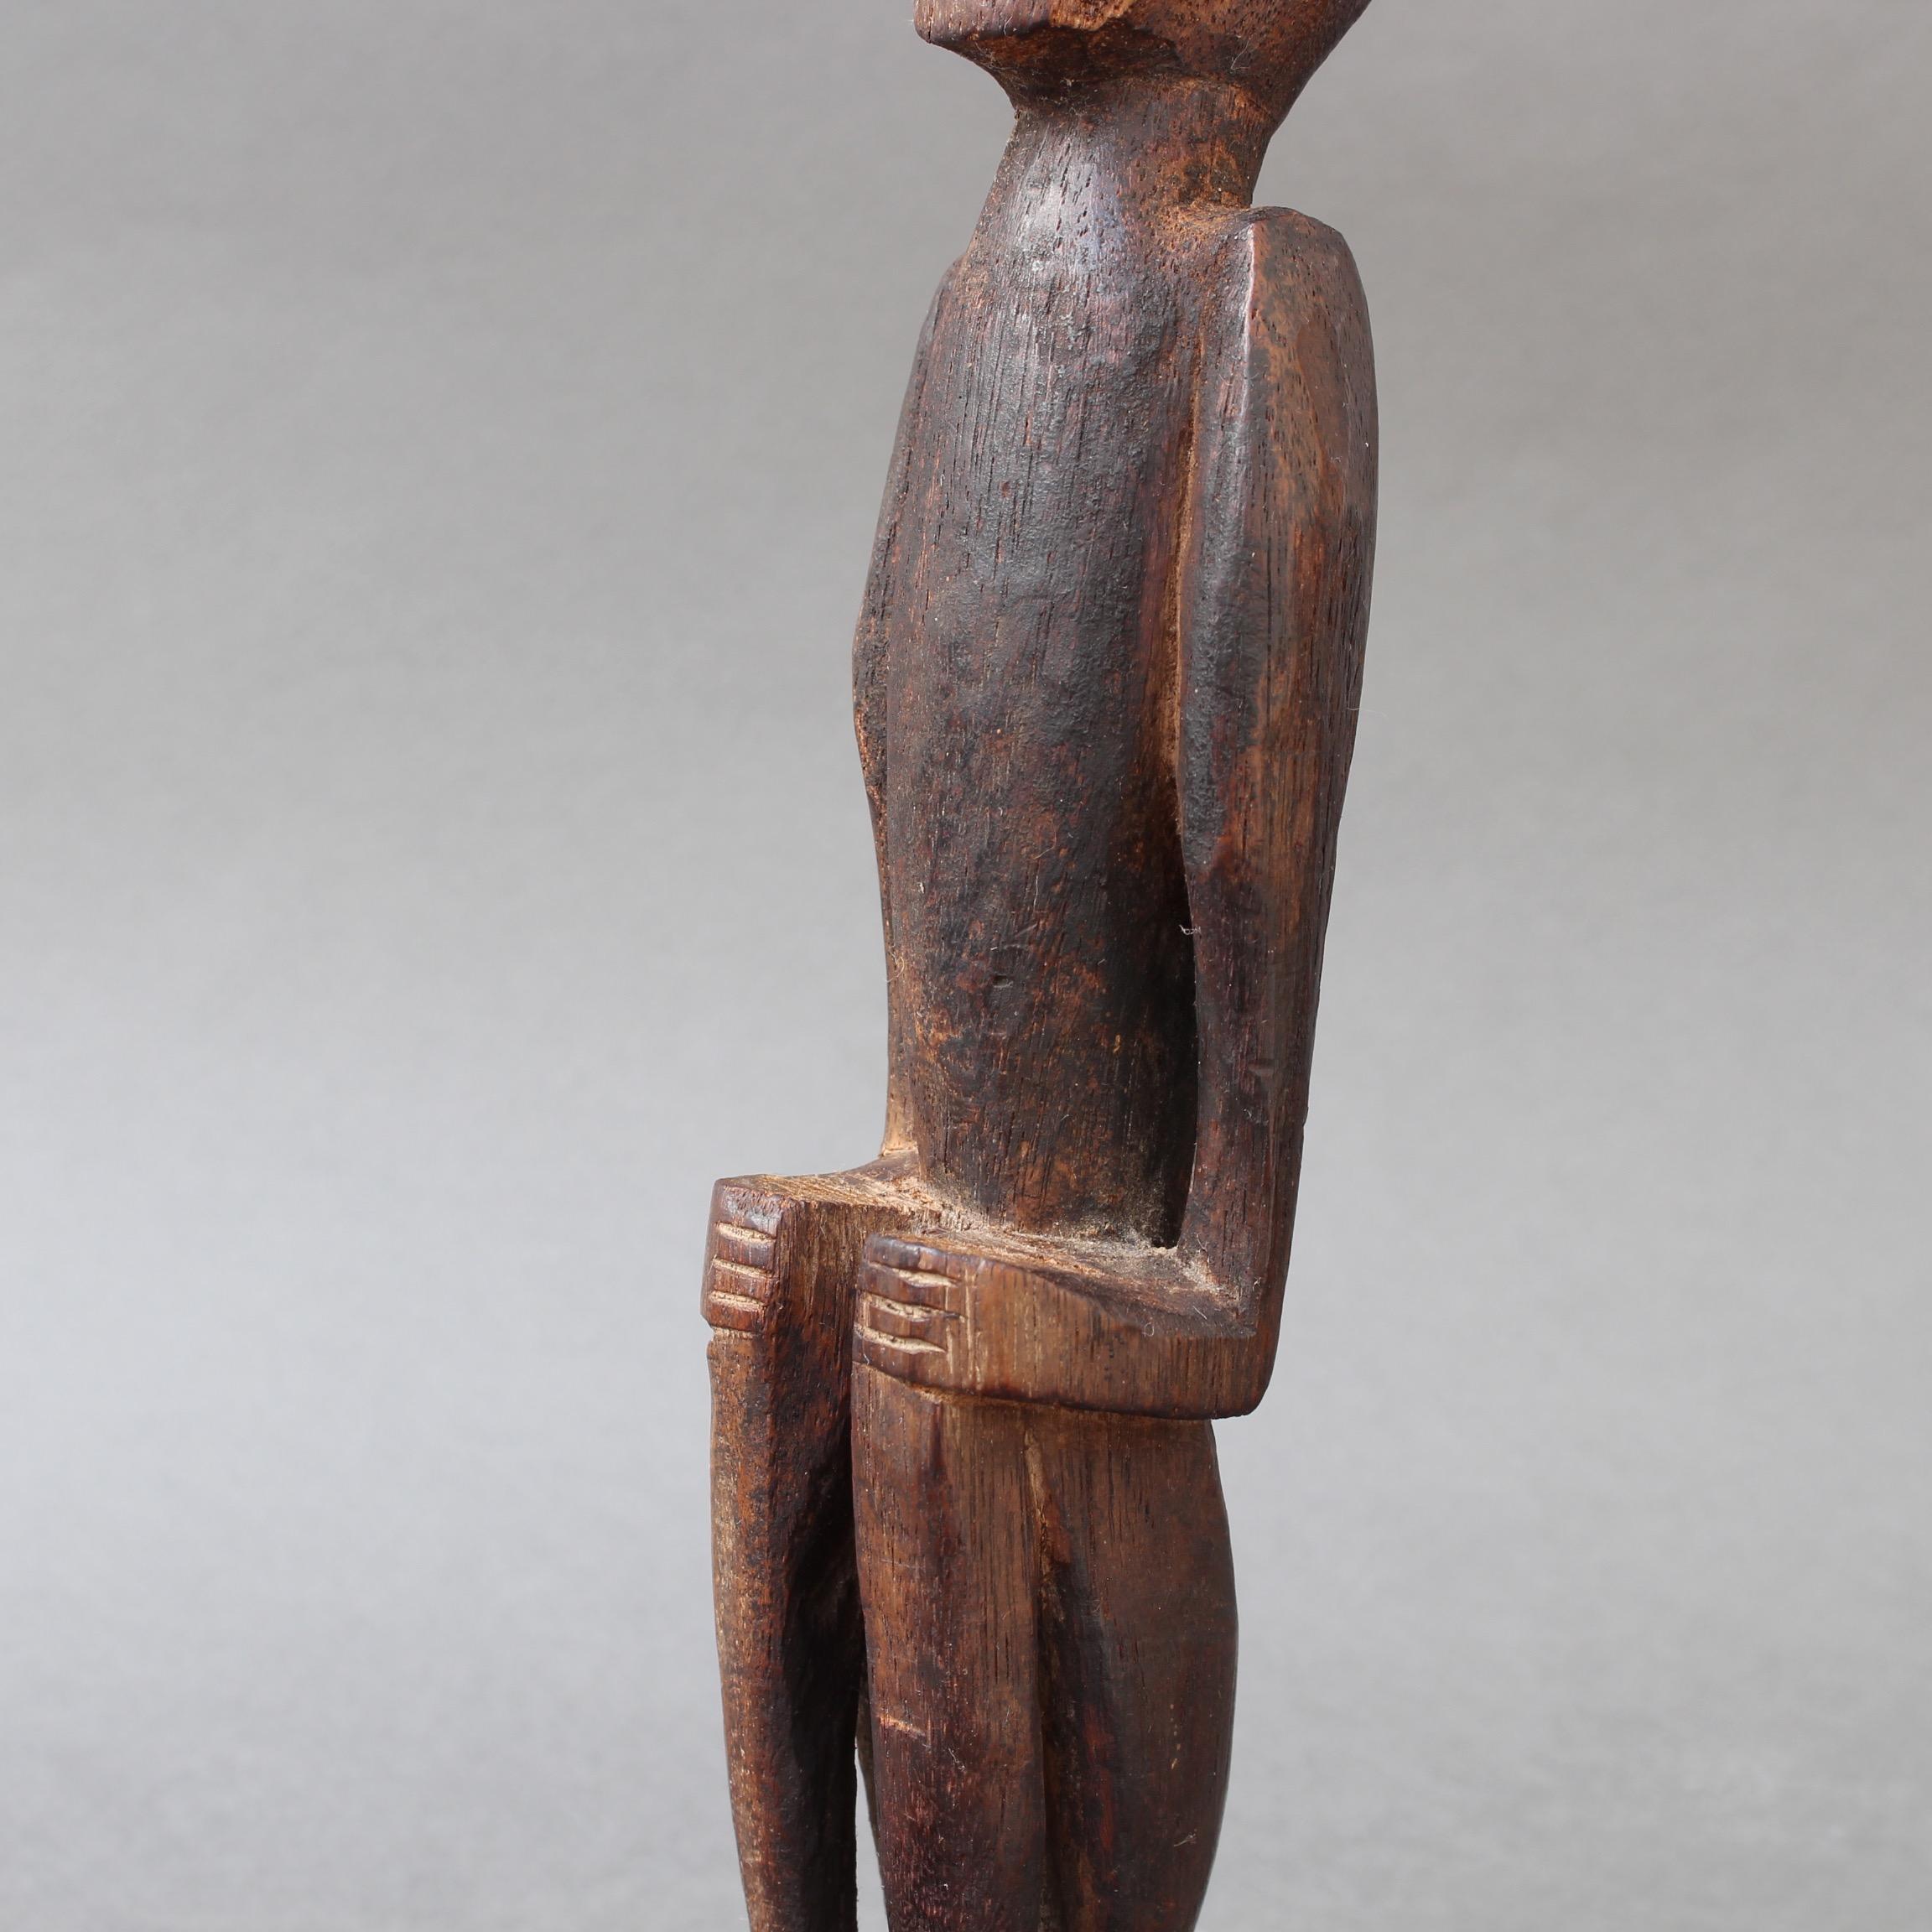 Wooden Sculpture or Carving of Sitting Figure from Sumba Island, Indonesia 13